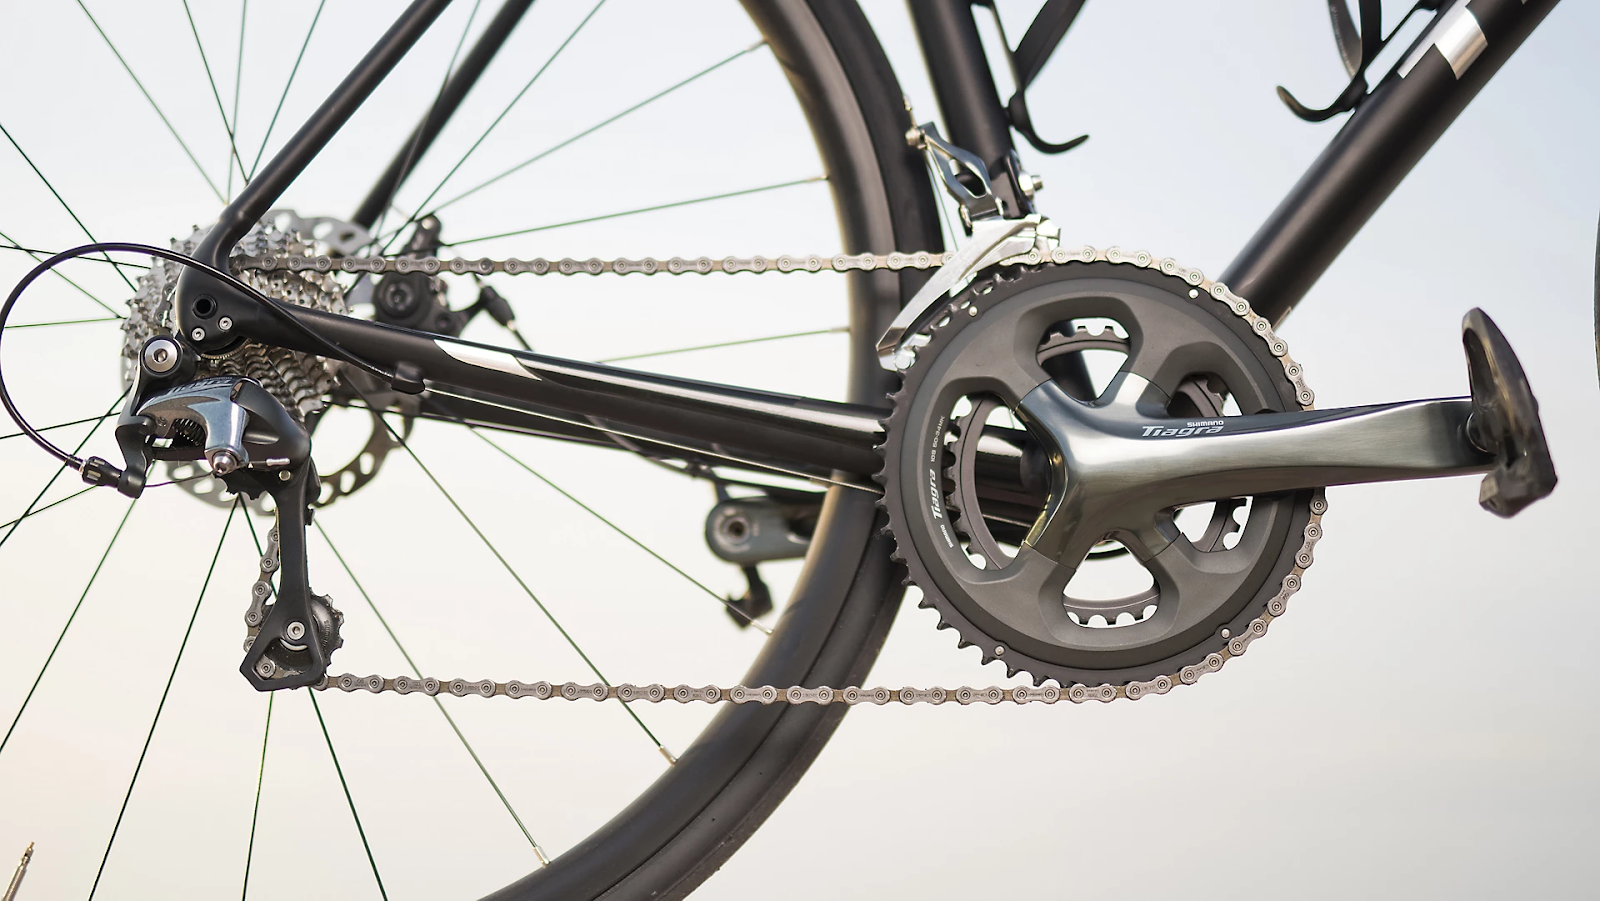 The length of your mountain bike chain should allow for smooth pedaling and gear changing and shouldn’t be too loose or too tight.